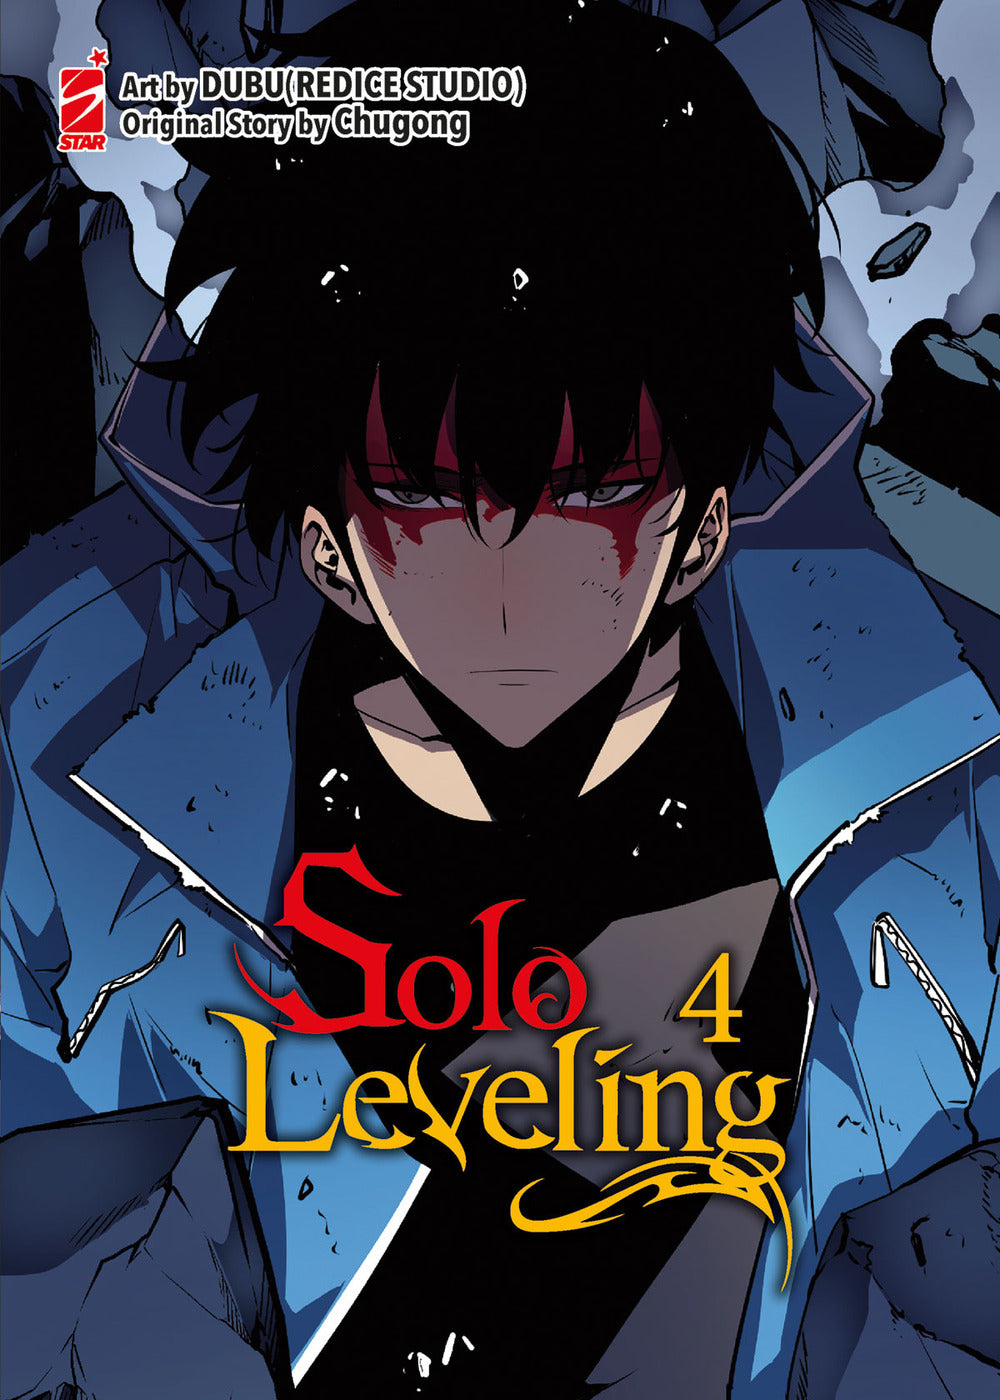 Solo leveling. Vol. 4